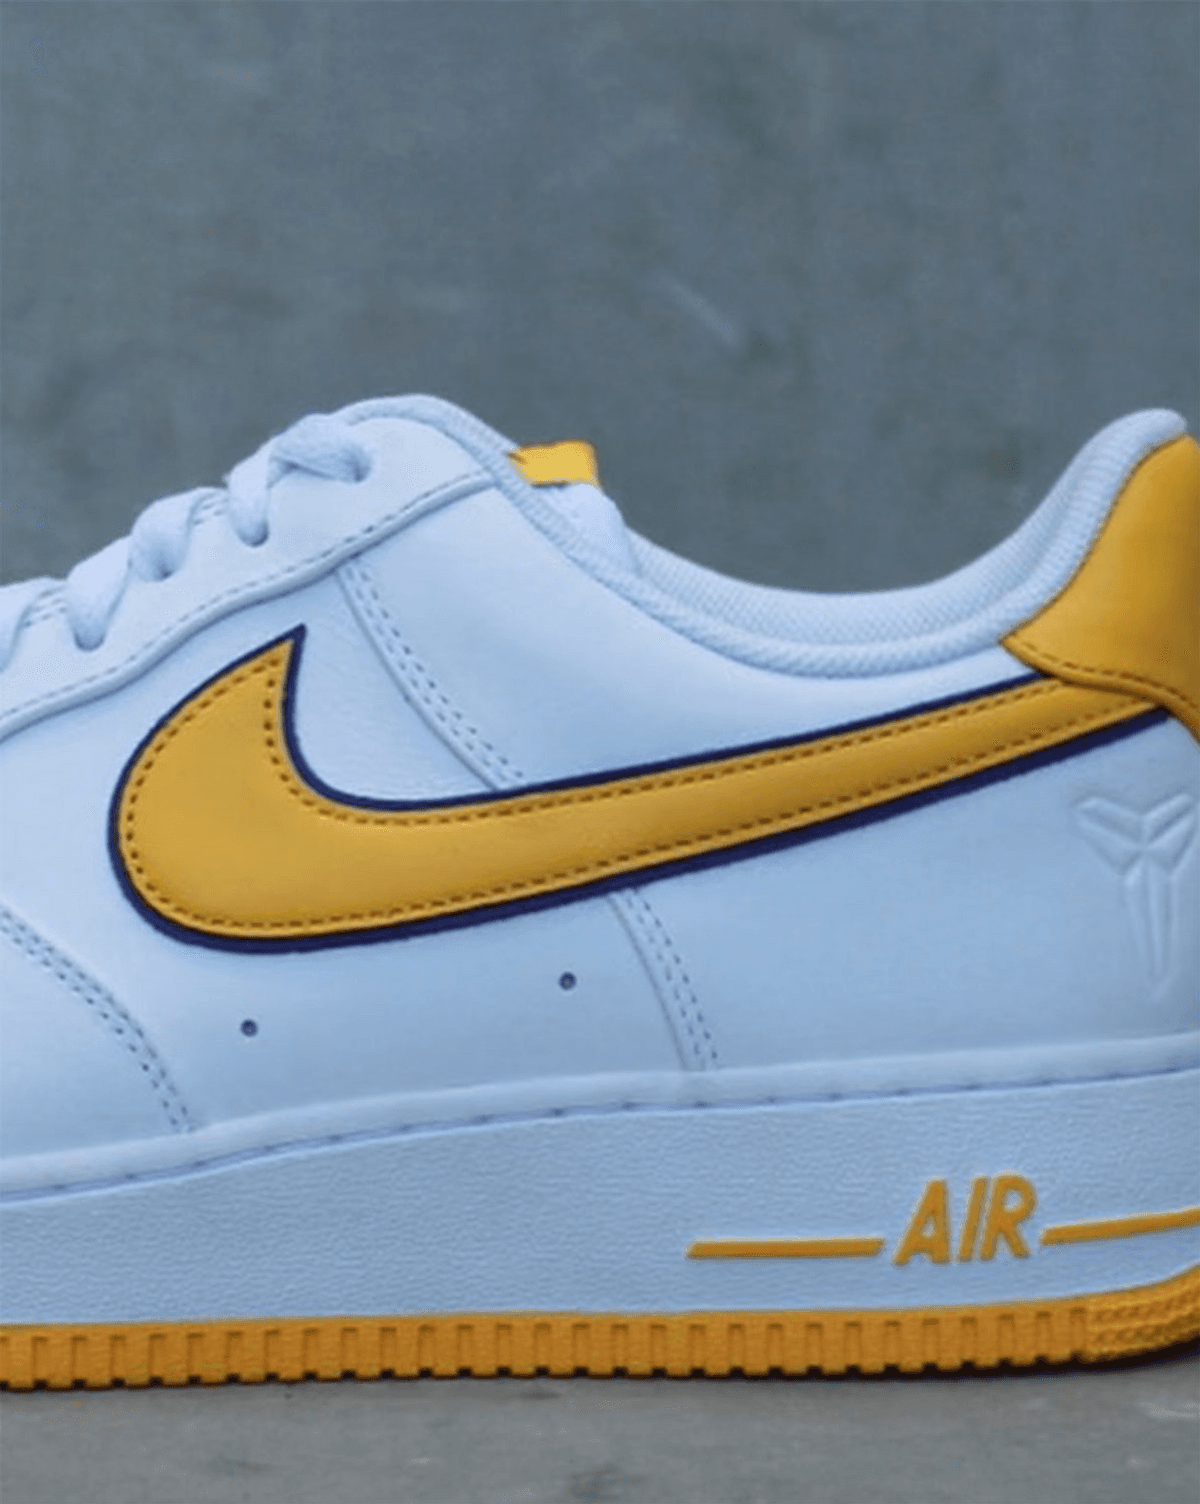 The Kobe Bryant x Nike Air Force 1 Low Has Been Confirmed To Release This Year